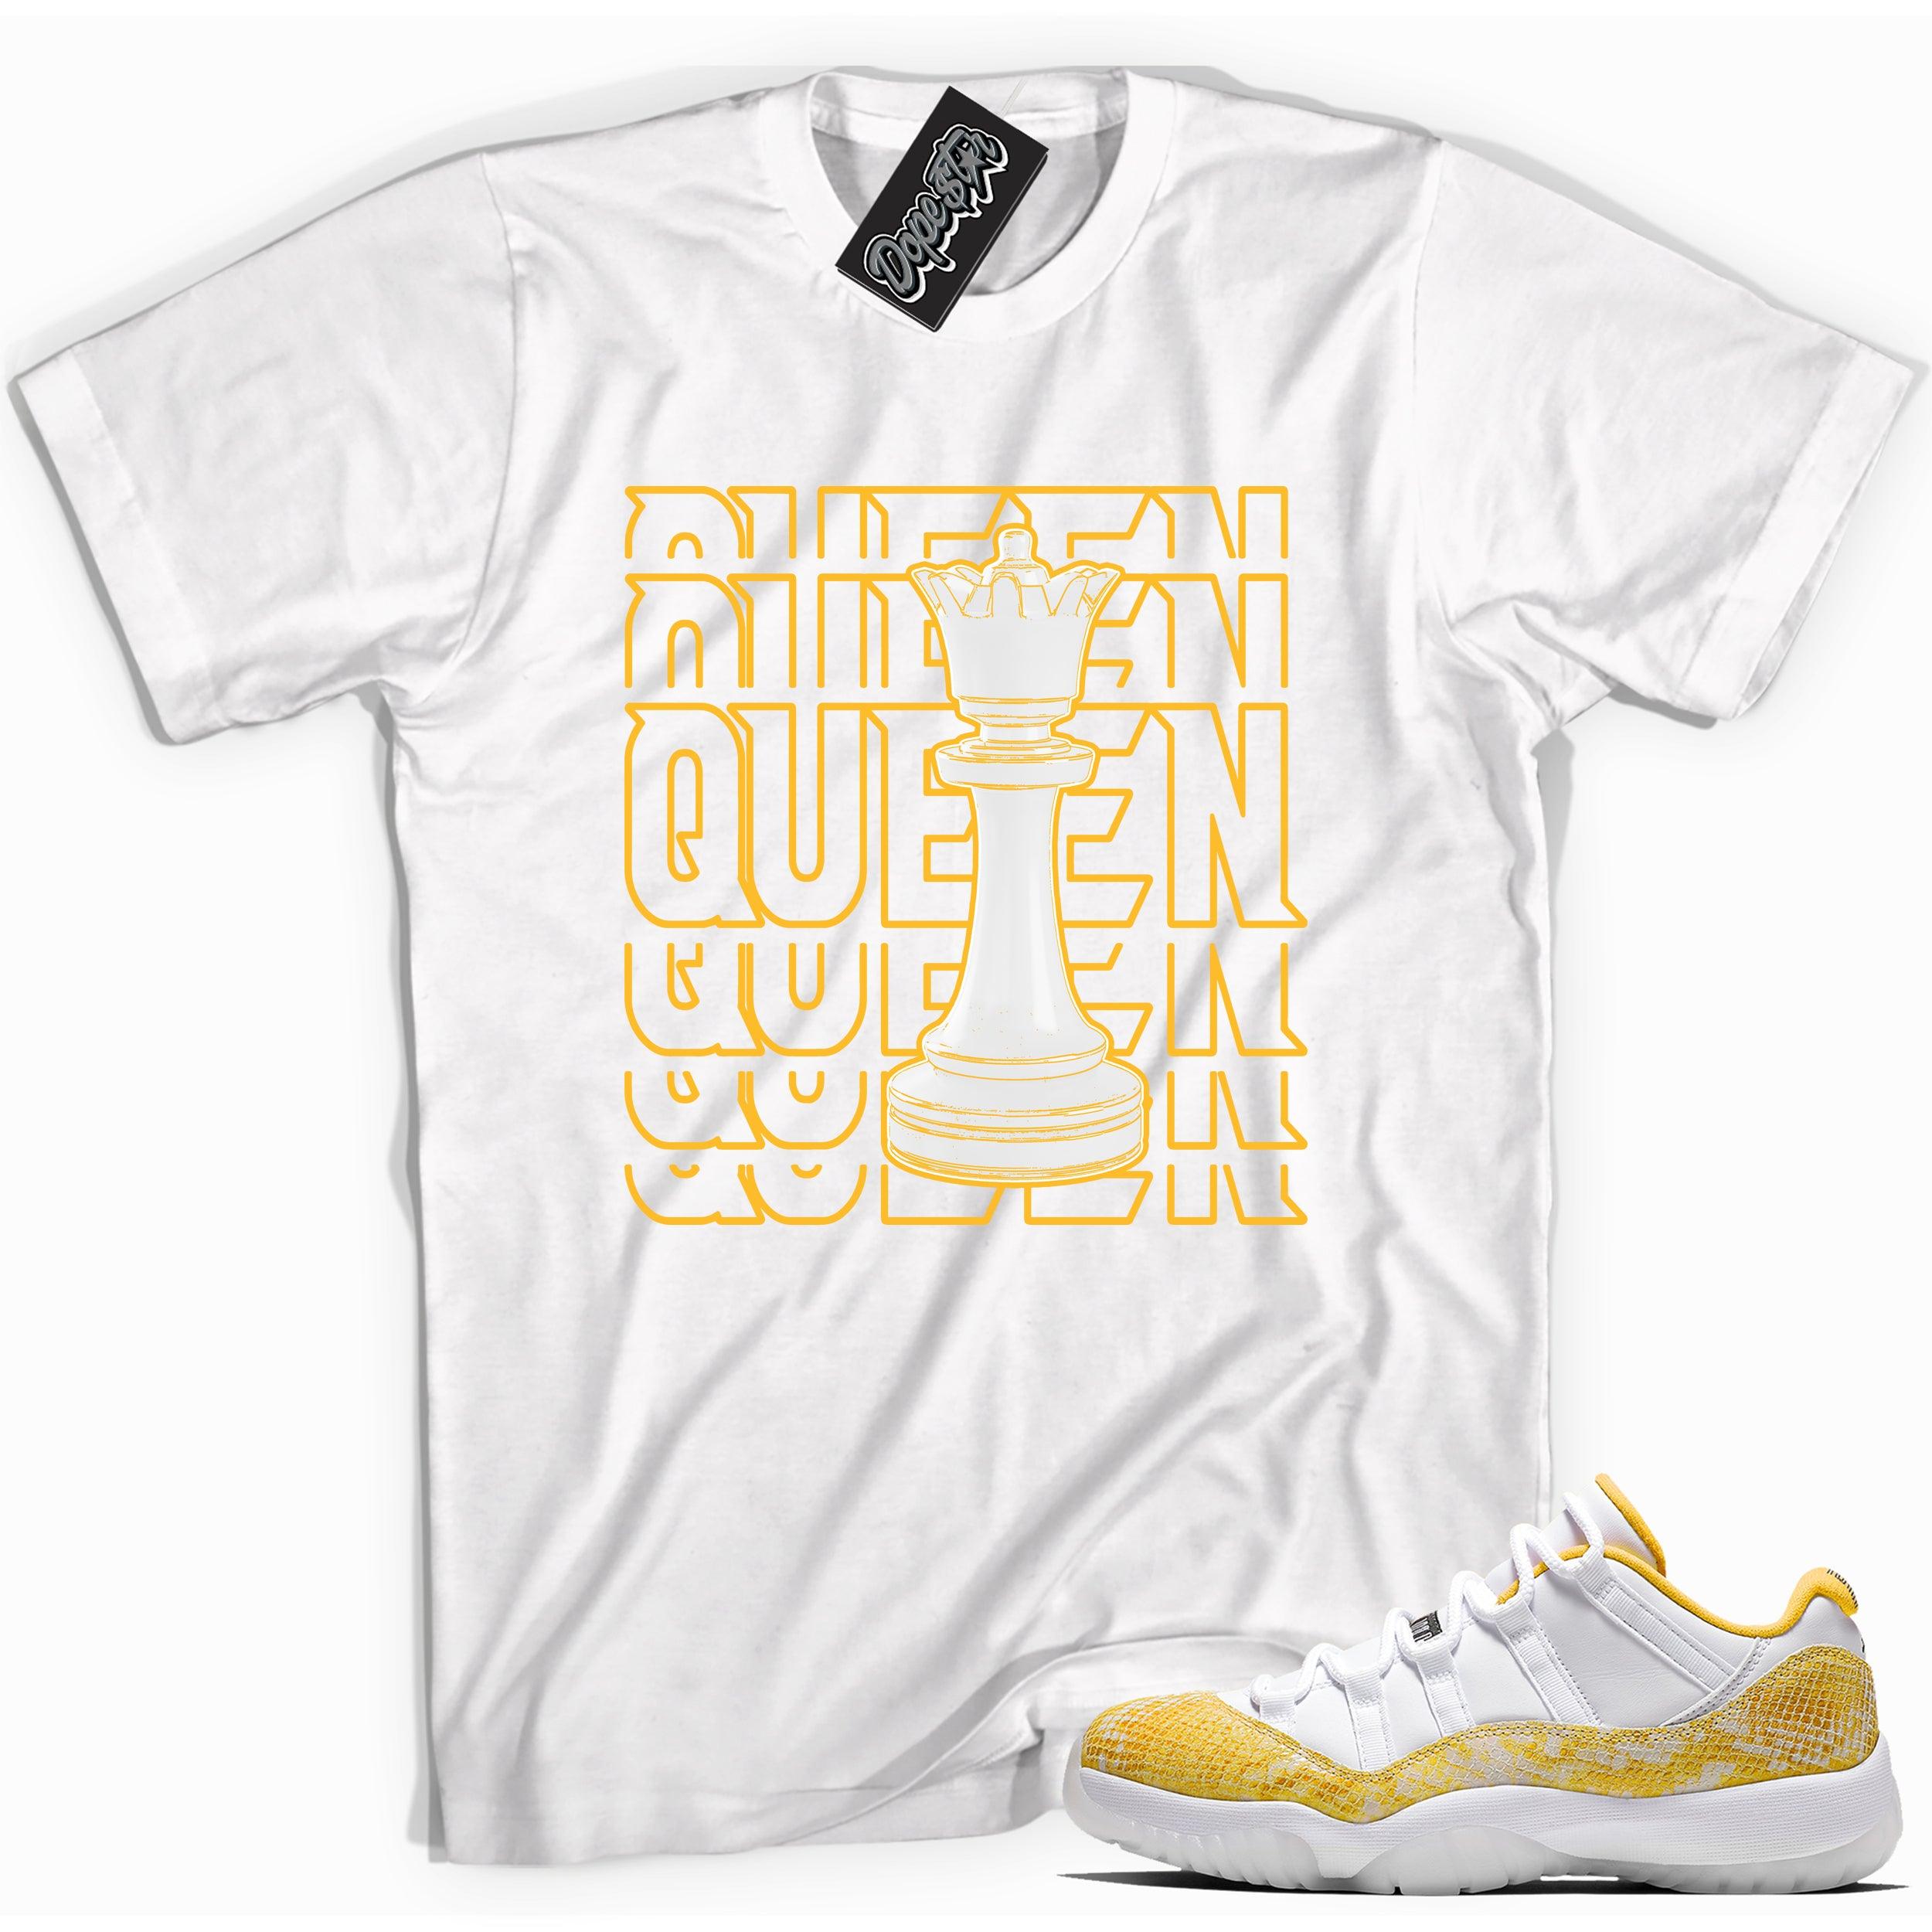 Cool white graphic tee with 'Queen' print, that perfectly matches Air Jordan 11 Retro Low Yellow Snakeskin sneakers